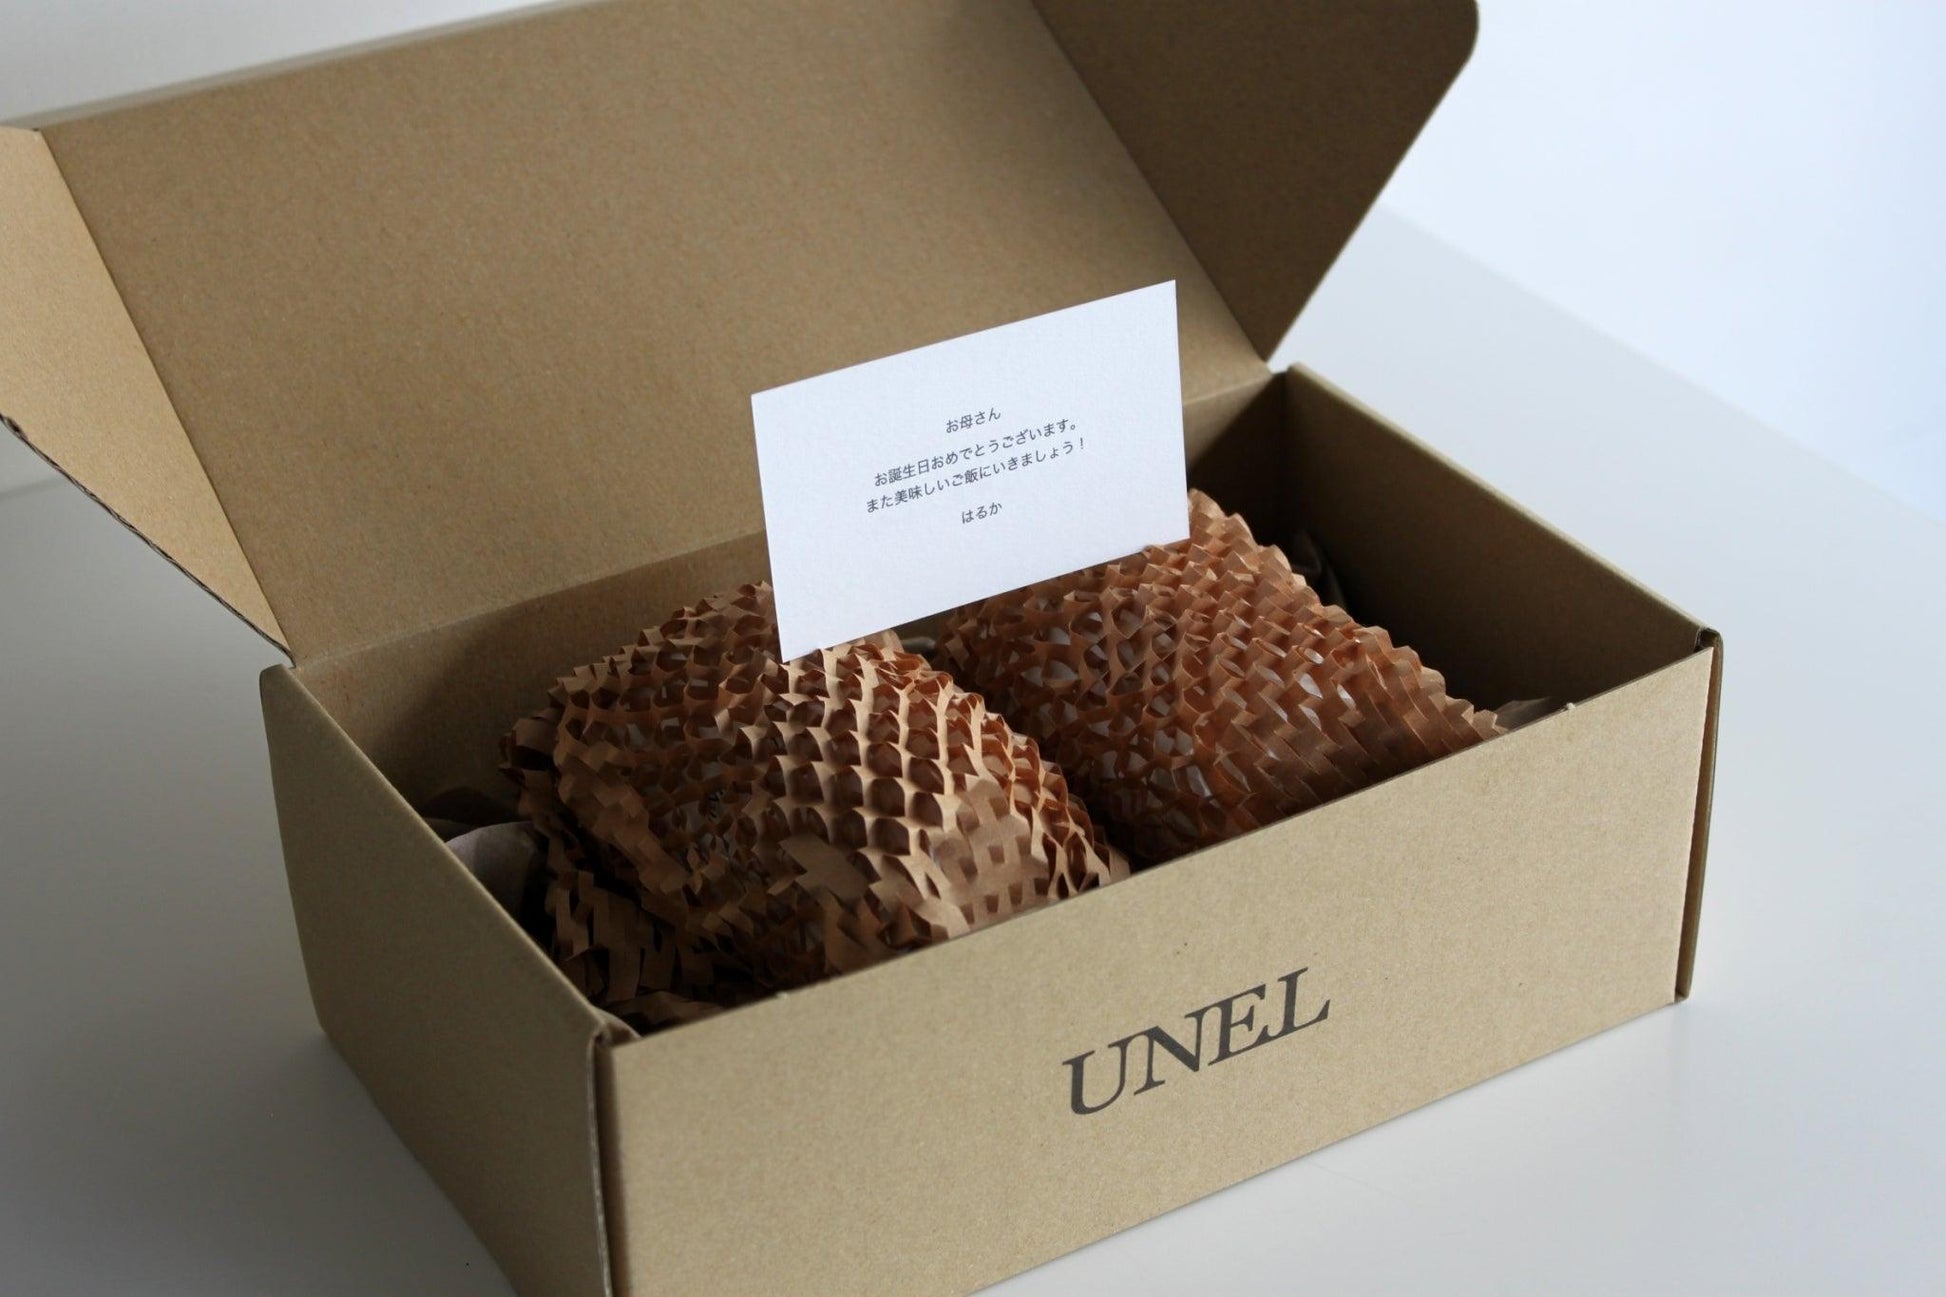 fragrance candles - UNEL